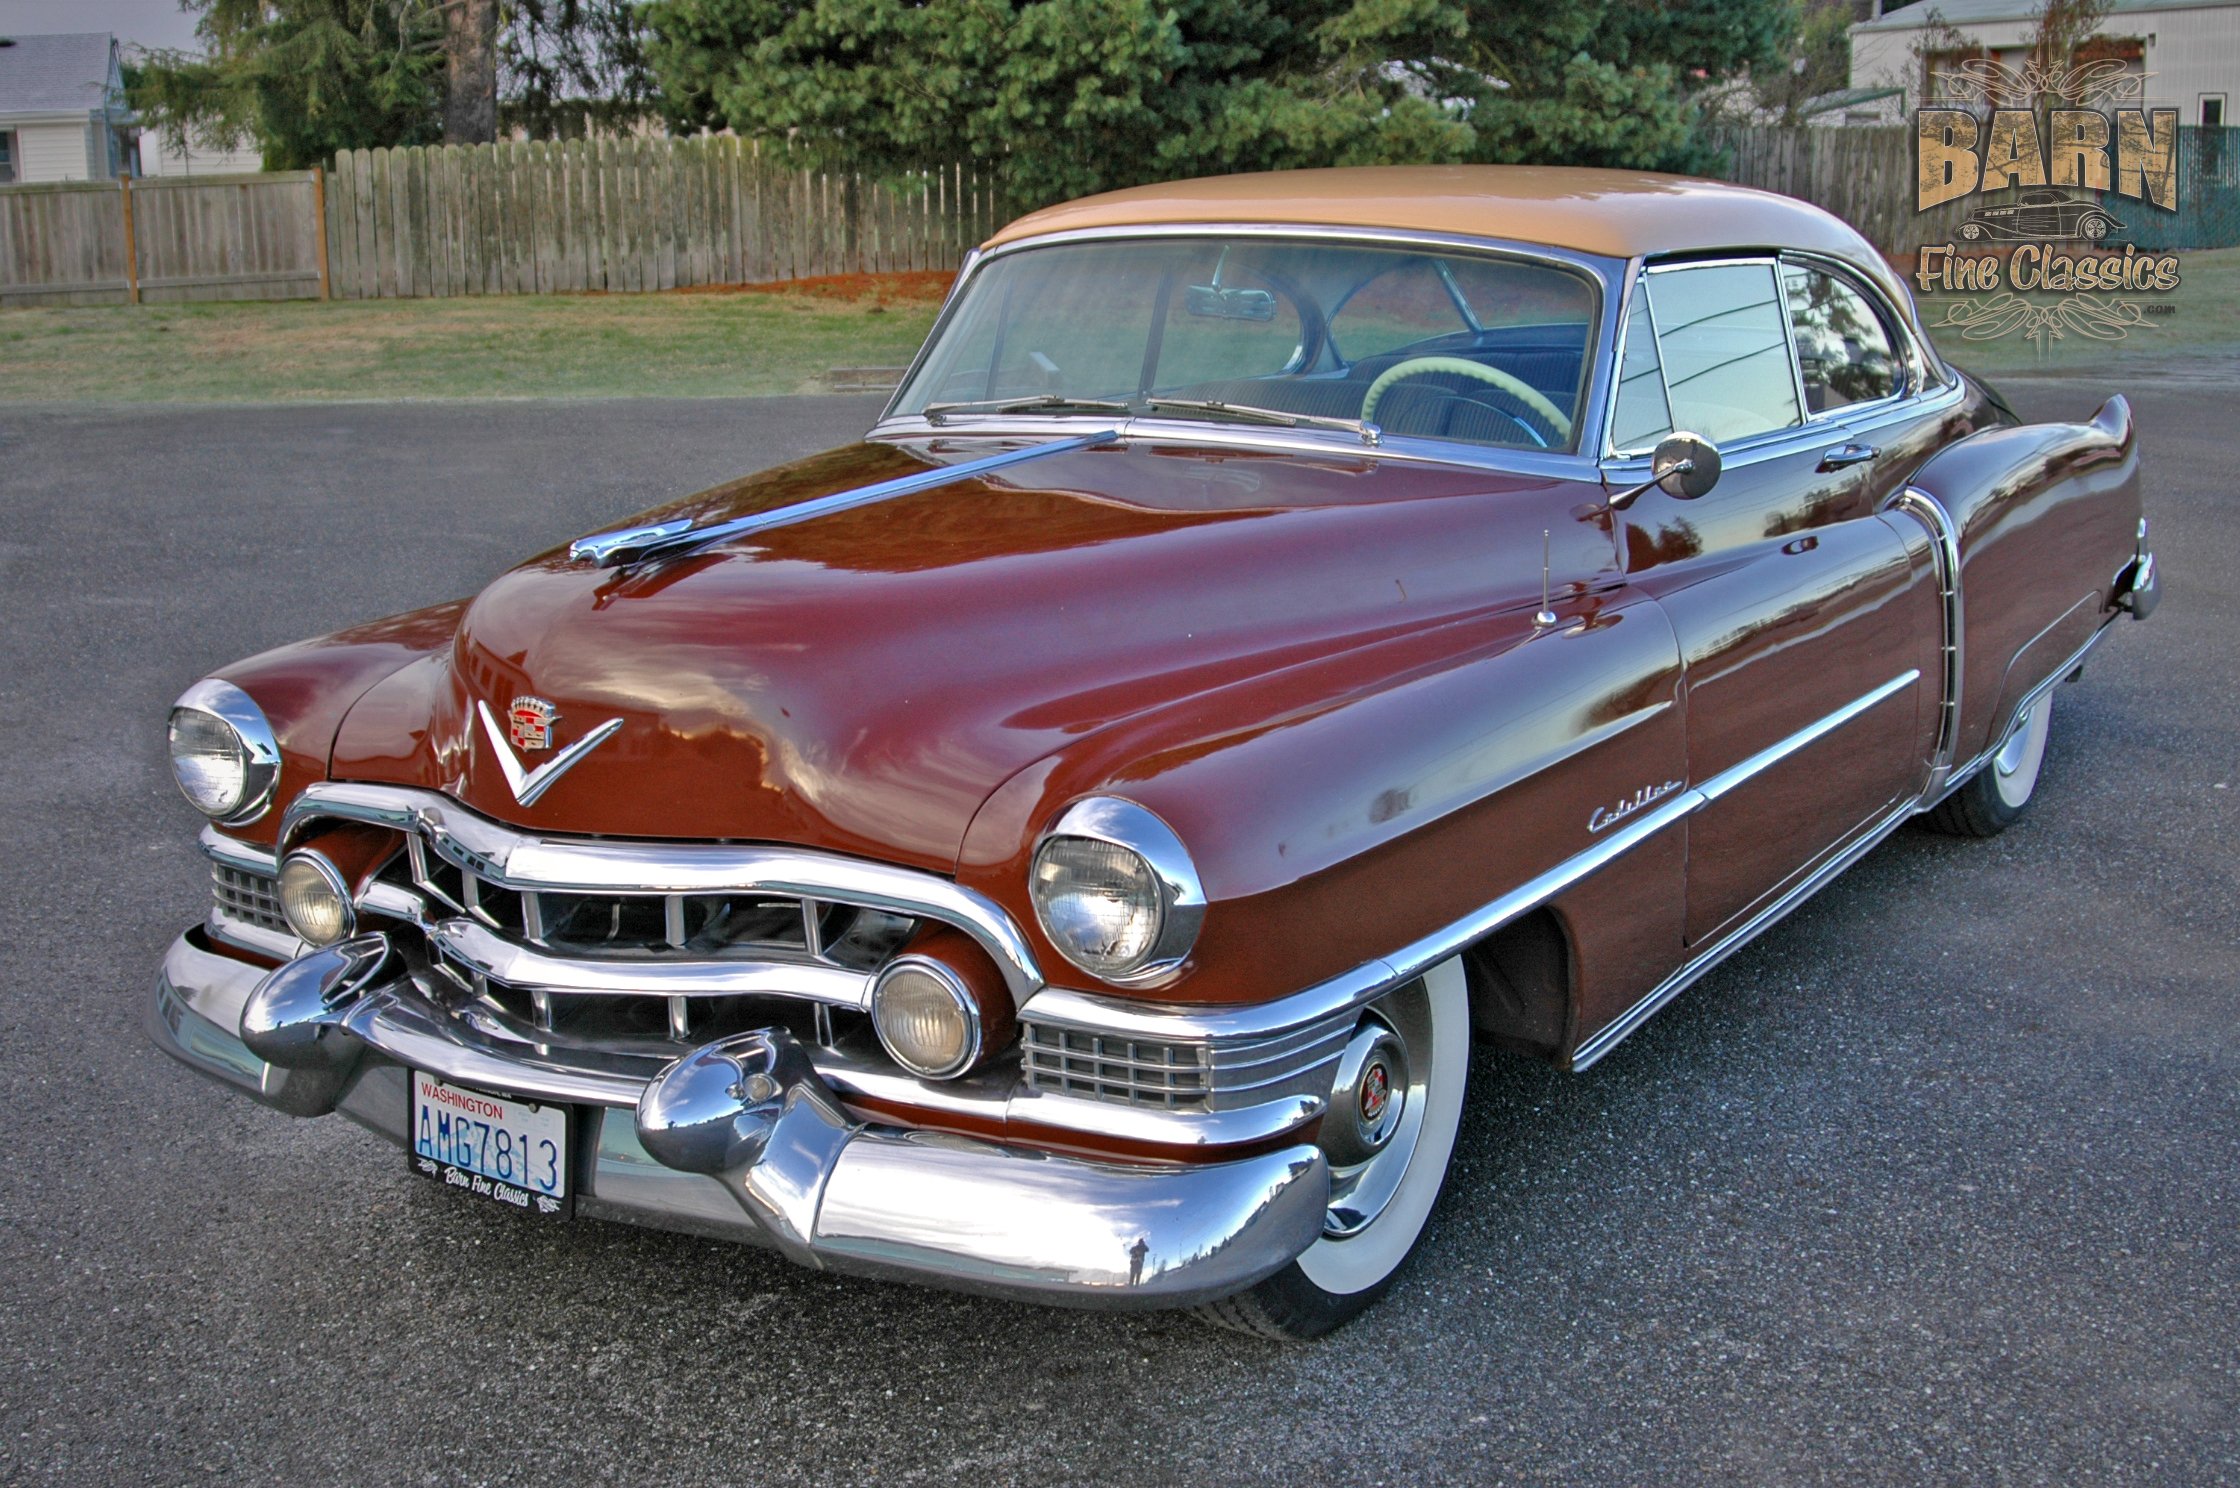 1951, Cadillac, Series, 62, Classic, Old, Vintage, Usa, 1500x1000 11 Wallpaper